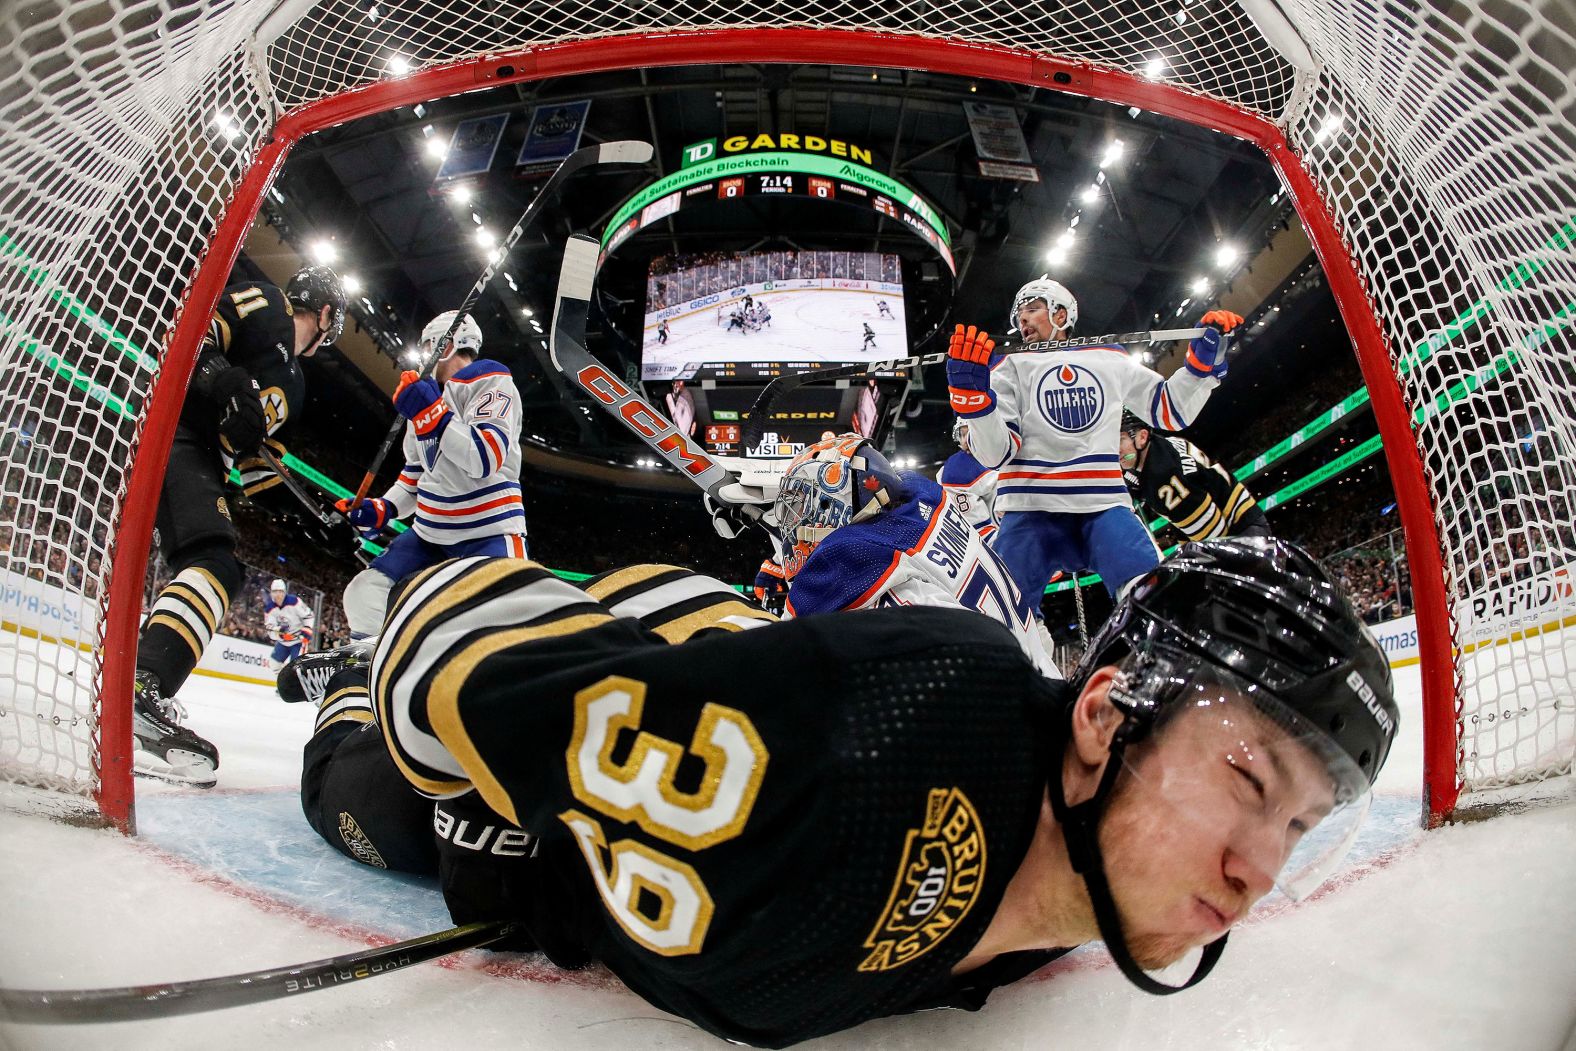 Boston Bruins center Morgan Geekie is dumped into the Edmonton Oilers' net during an NHL game in Boston on Tuesday, March 5.